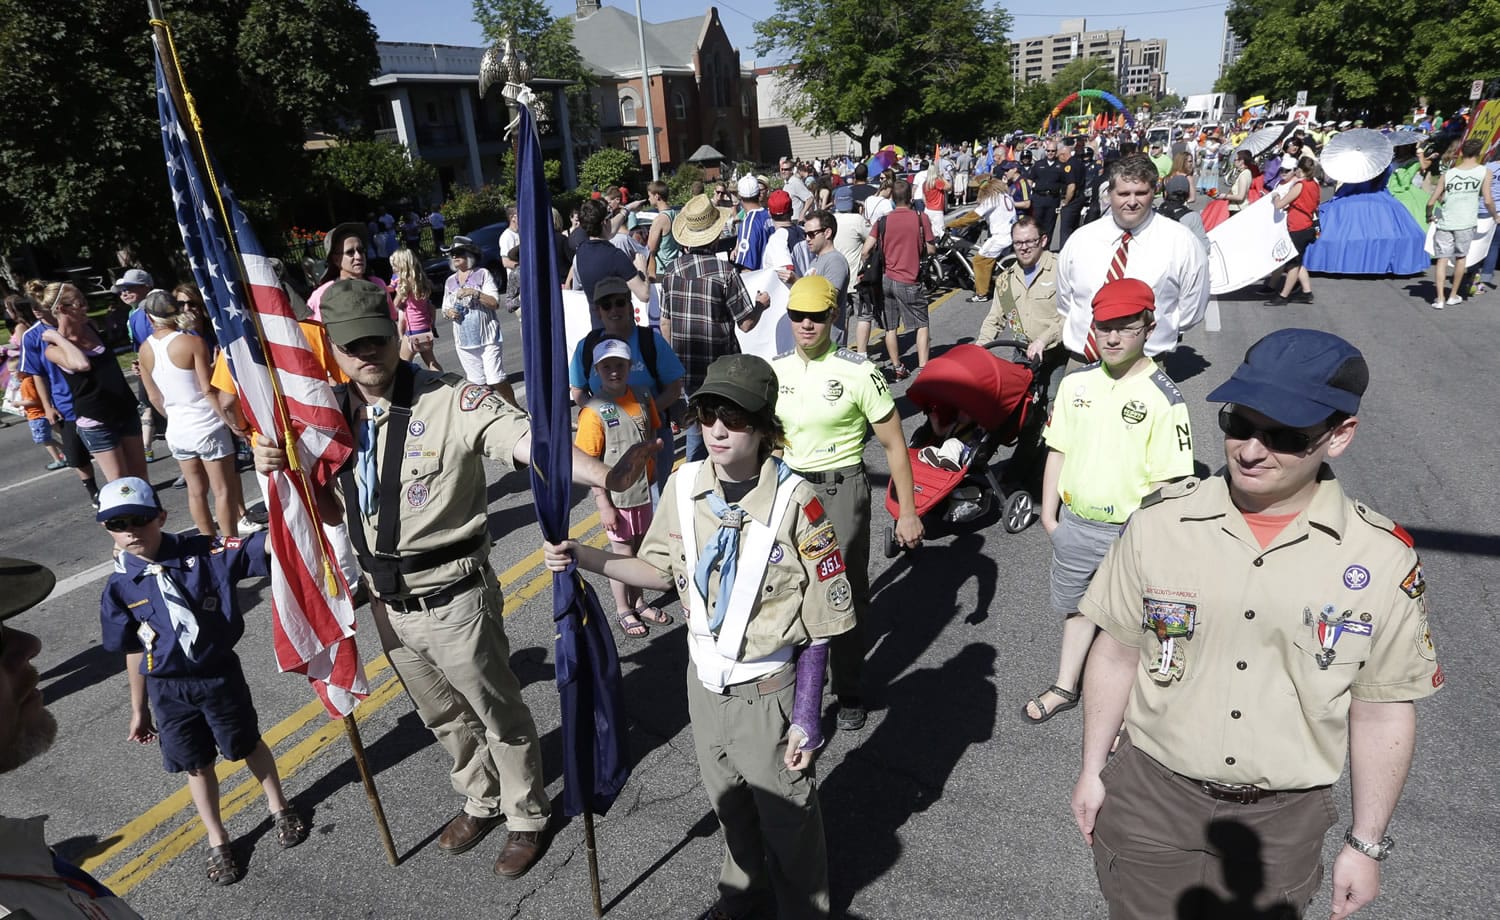 Boy Scouts line up before marching in the Utah Gay Pride Parade in Salt Lake City on Sunday.